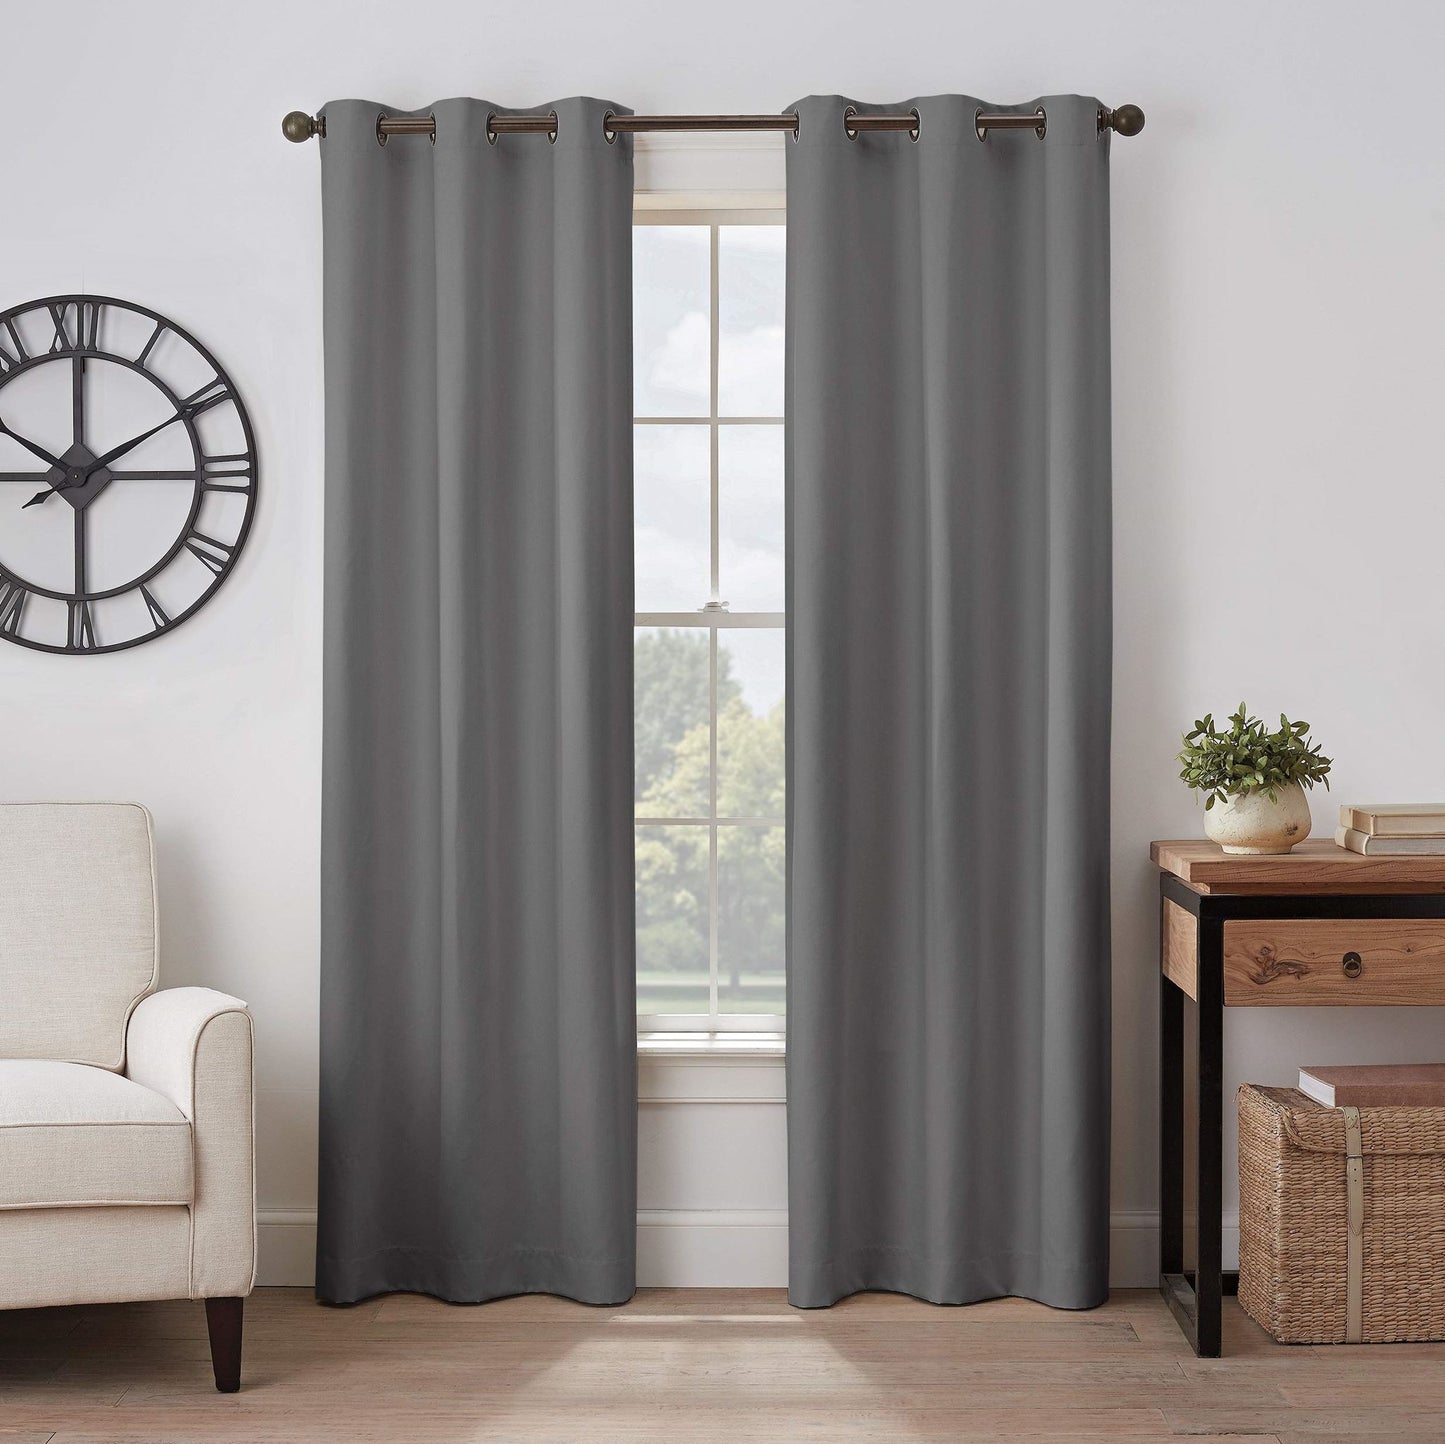 Eclipse Gabriella Grommet Top Curtains for Bedroom, Single Panel, 40" x 63", Dar